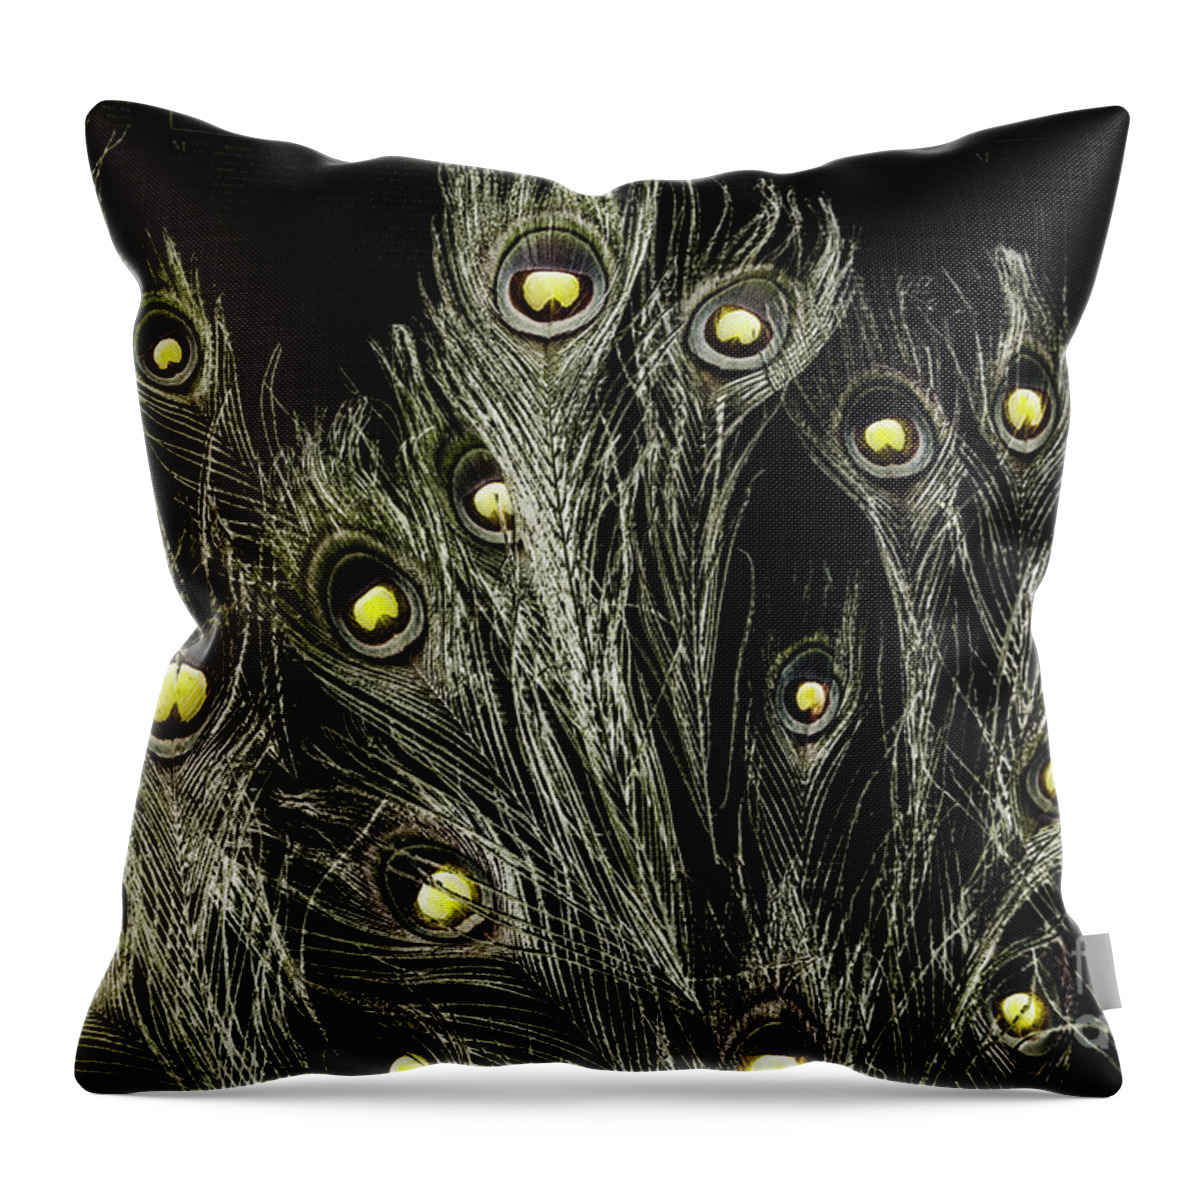 Feather Throw Pillow featuring the photograph Of many eyes by Jorgo Photography